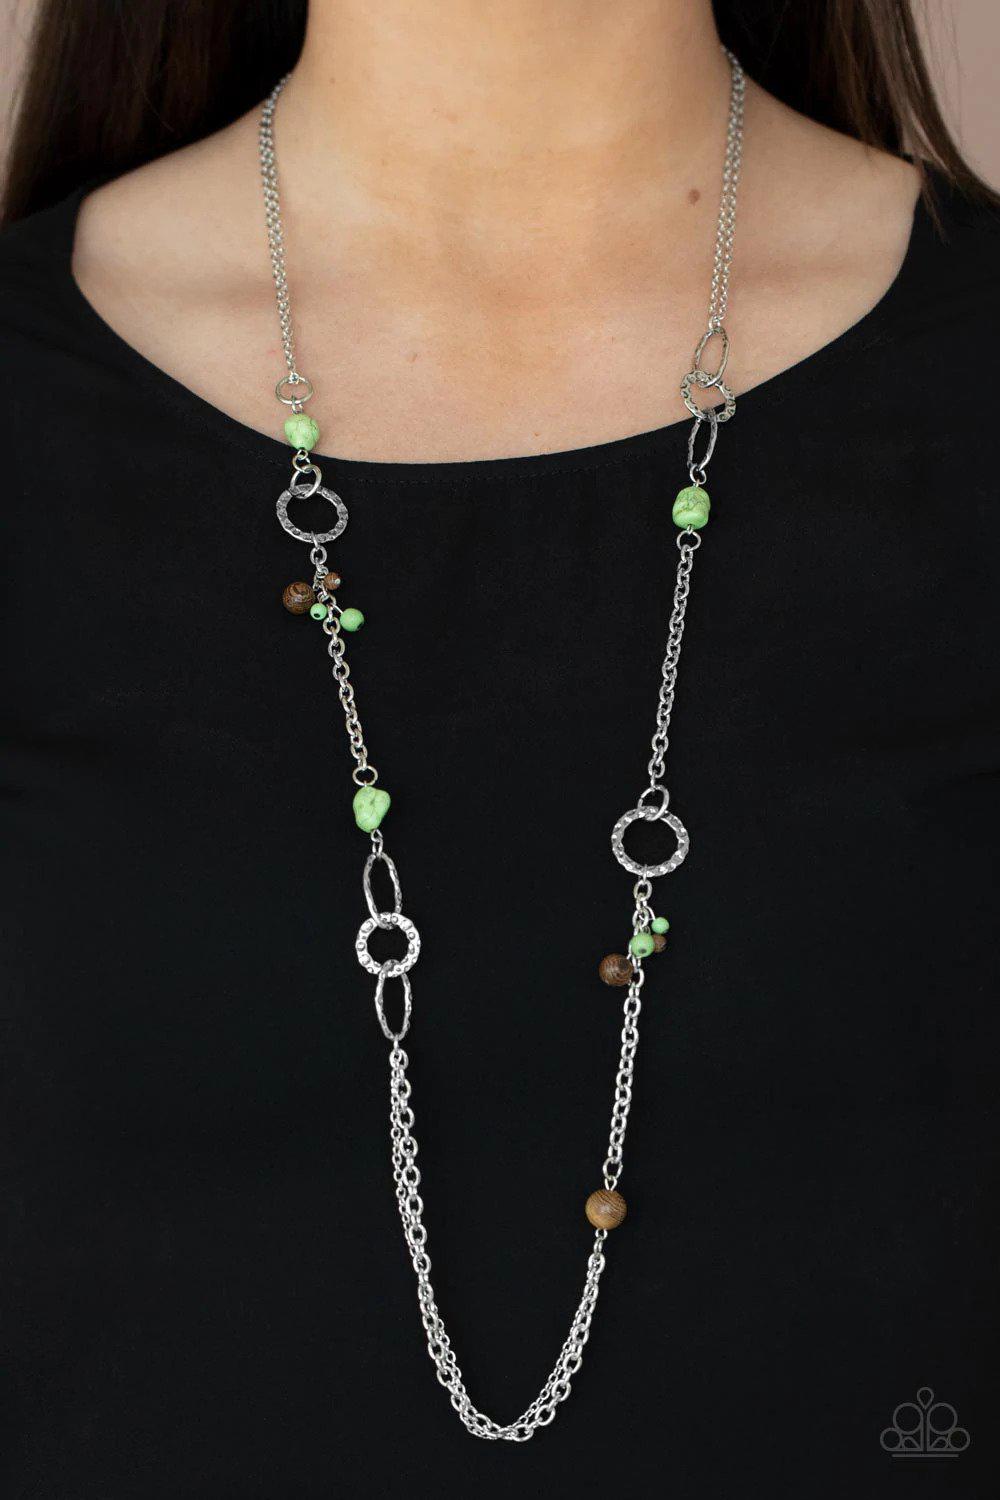 Sandstone Safari Green Necklace - Paparazzi Accessories- on model - CarasShop.com - $5 Jewelry by Cara Jewels